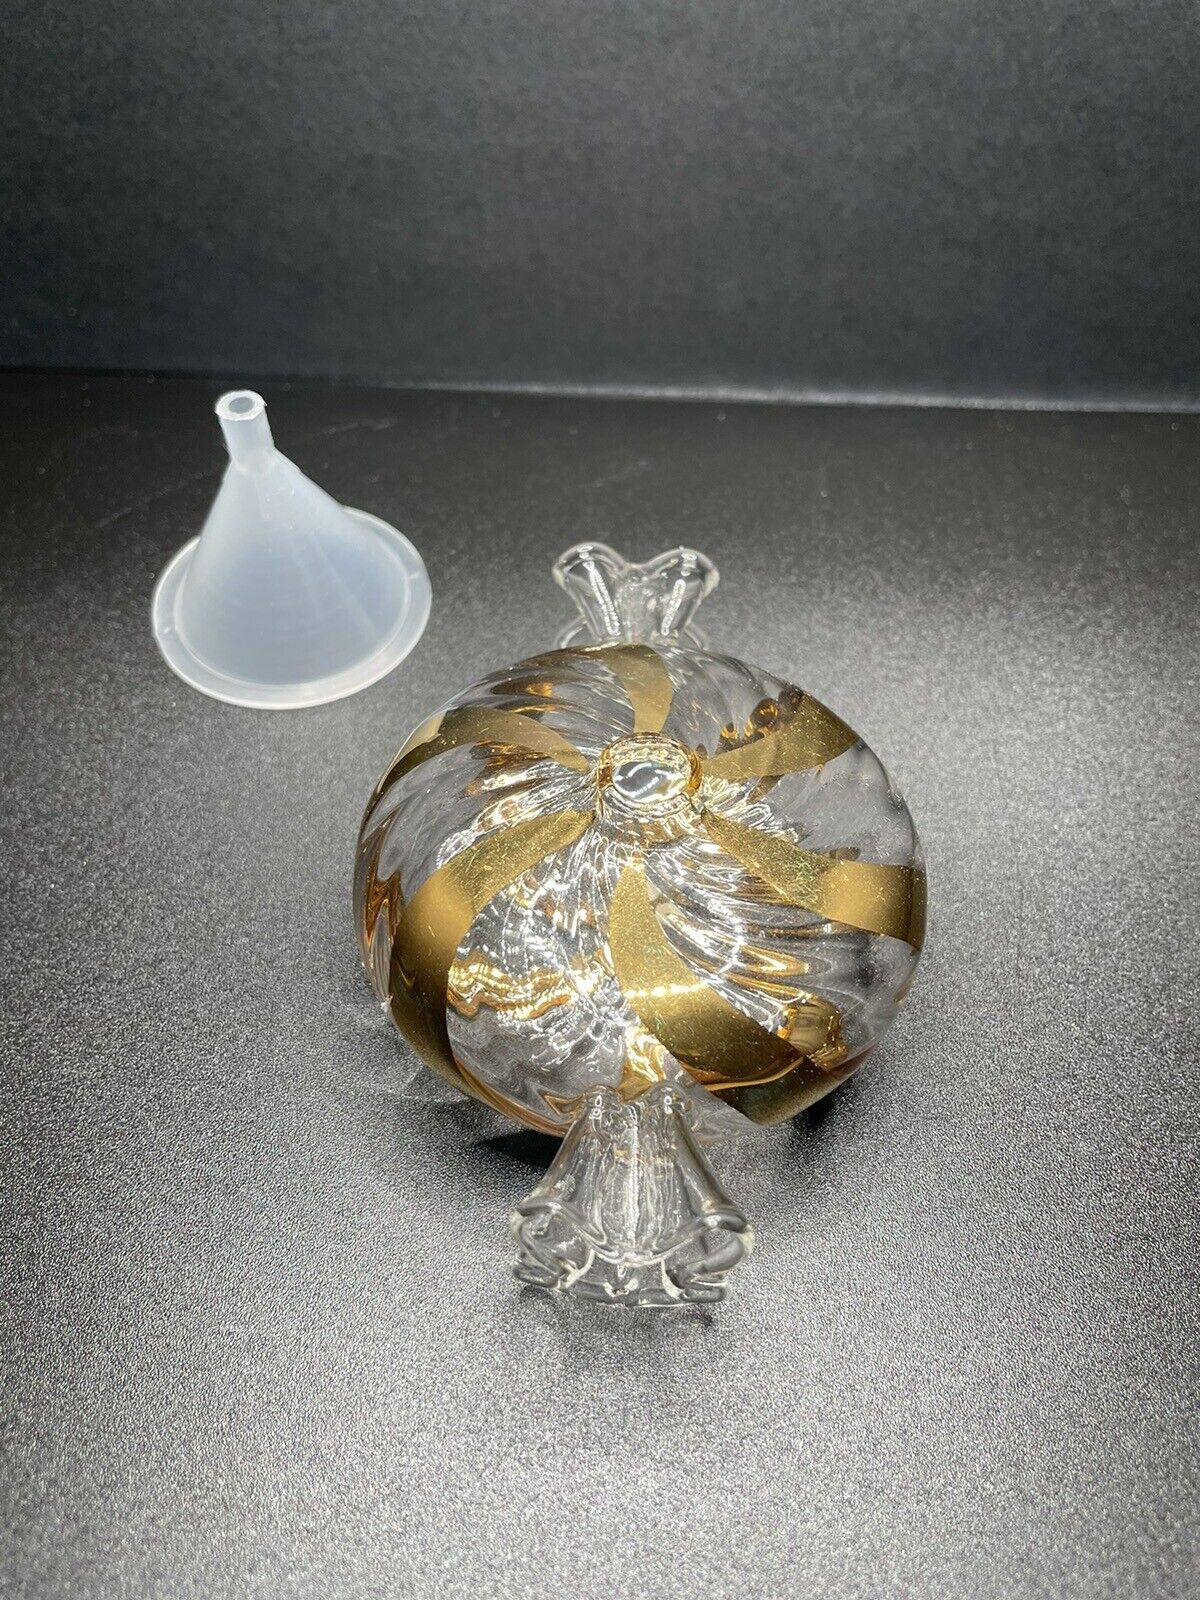 Princess House Candy Crystal Oil Lamp, Crystal and Gold.  New in Box.